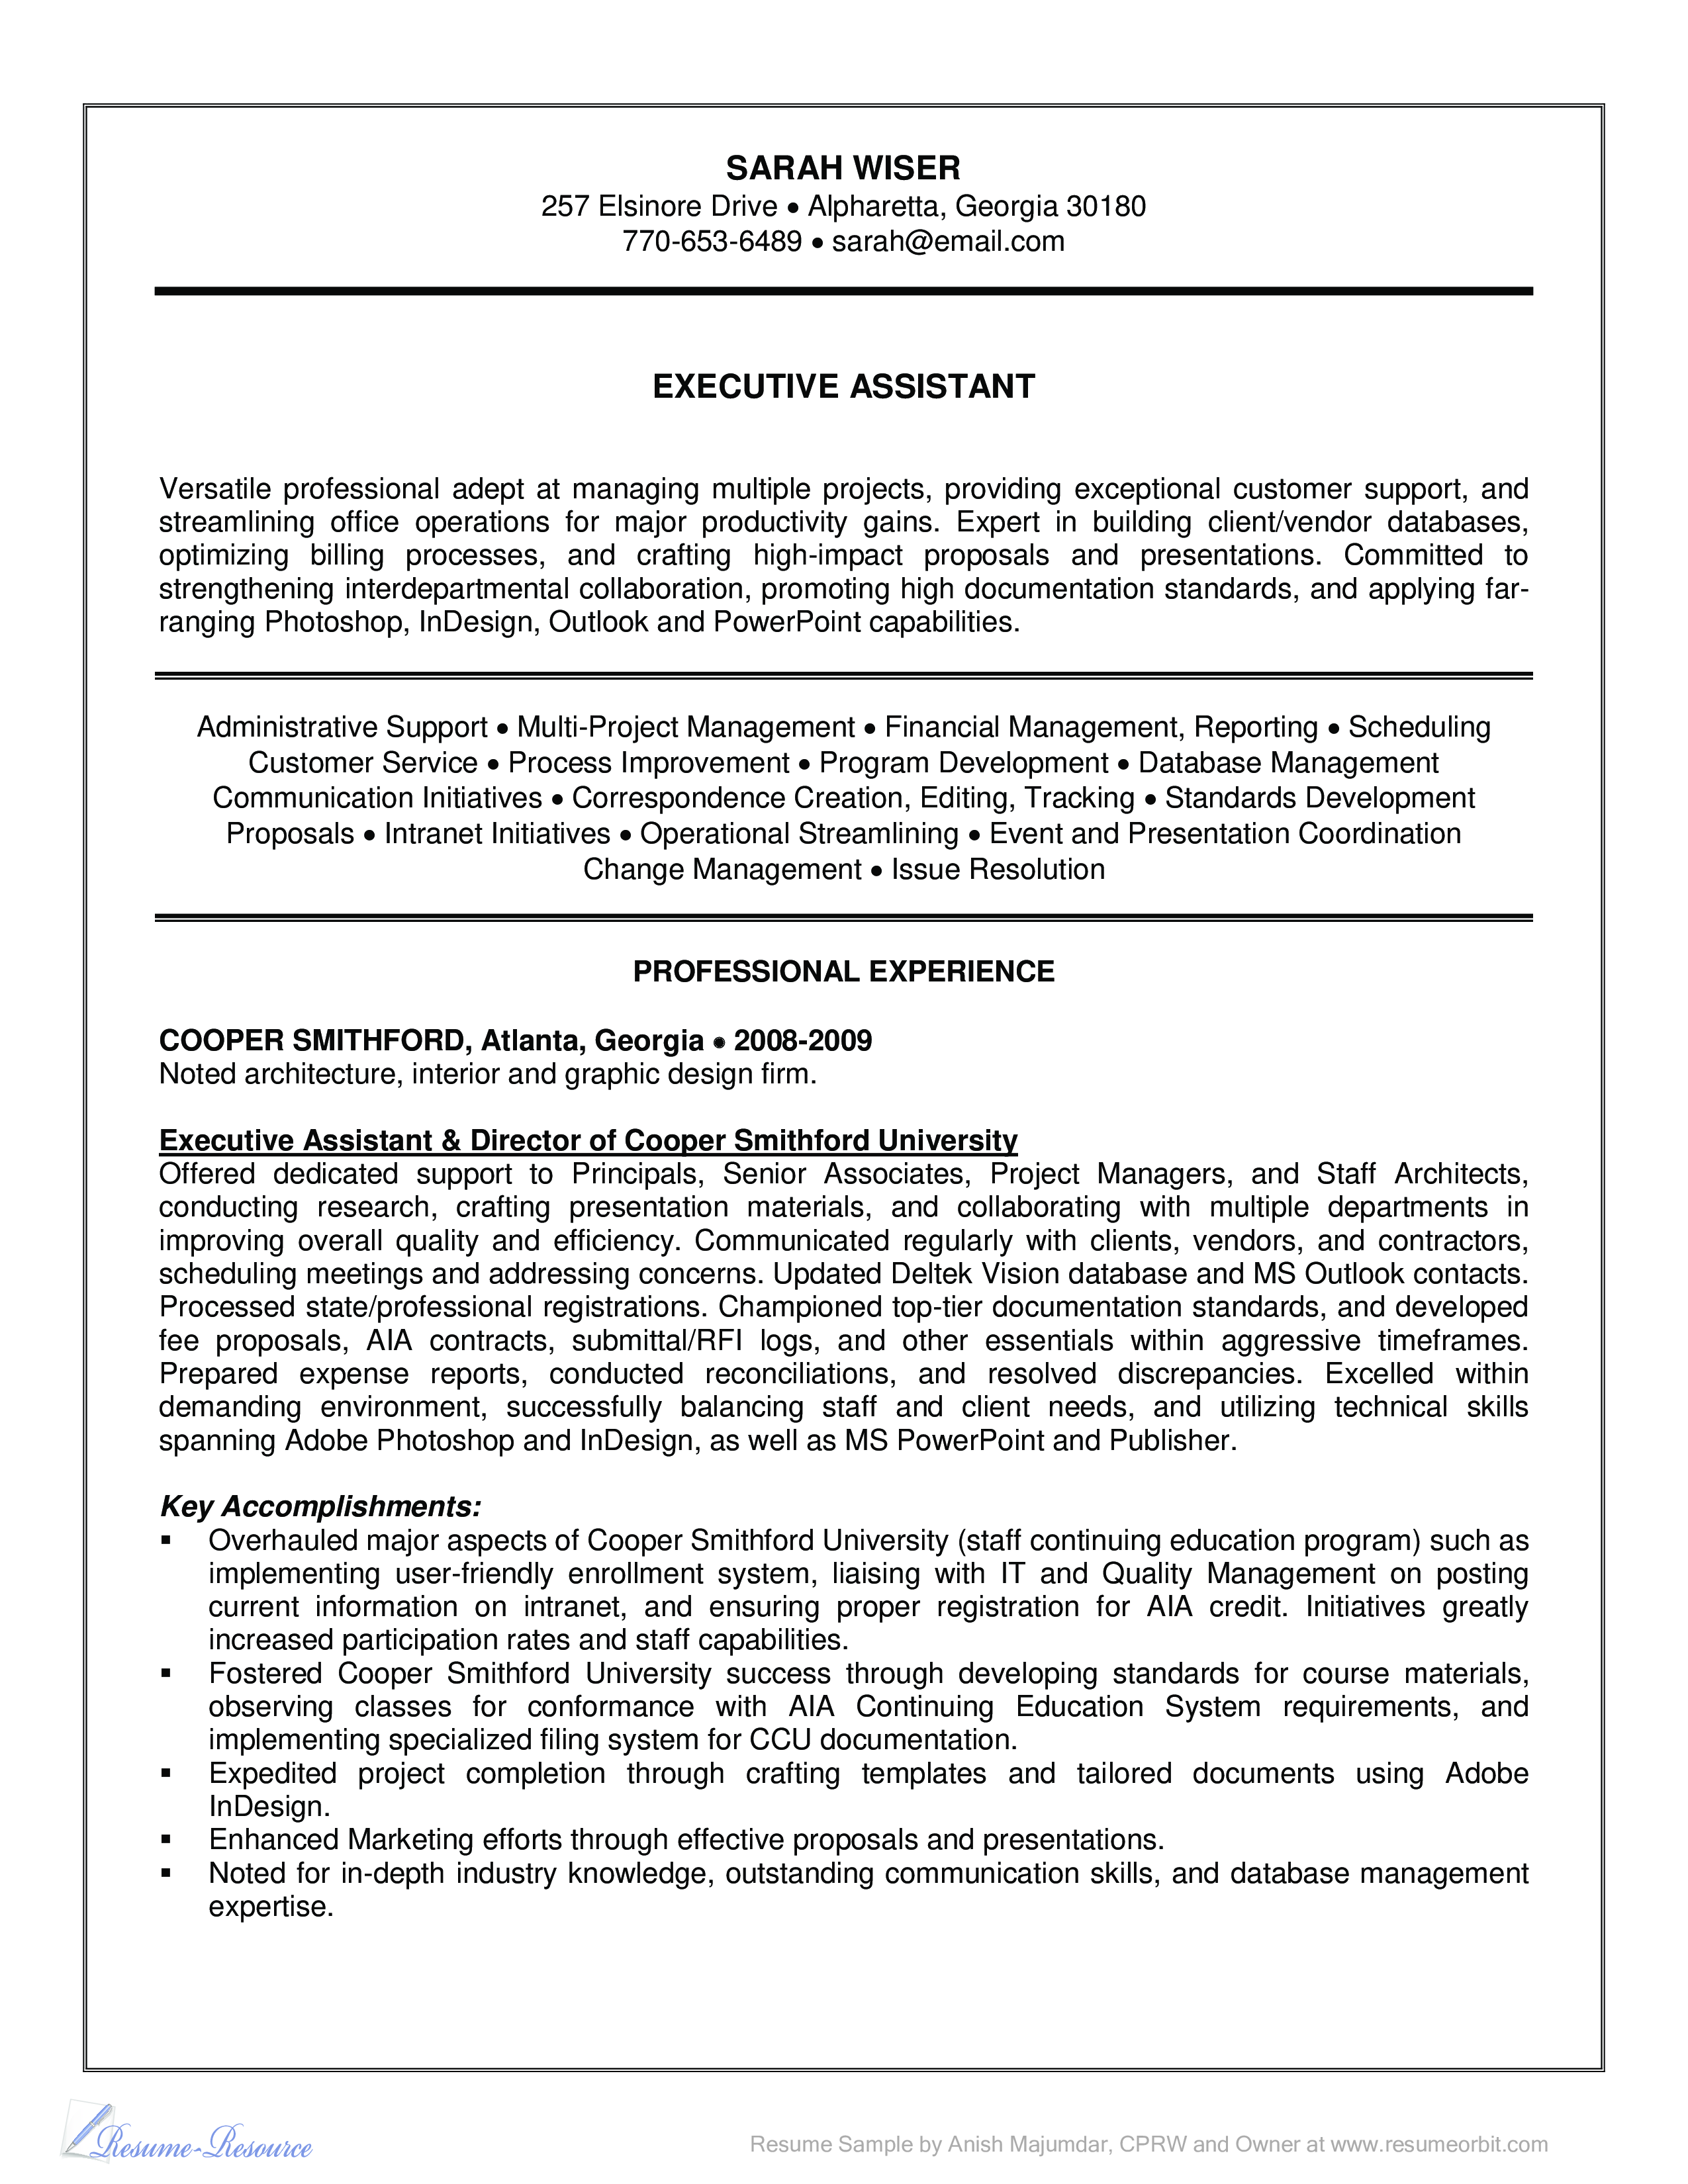 Executive Assistant Resume Templates at